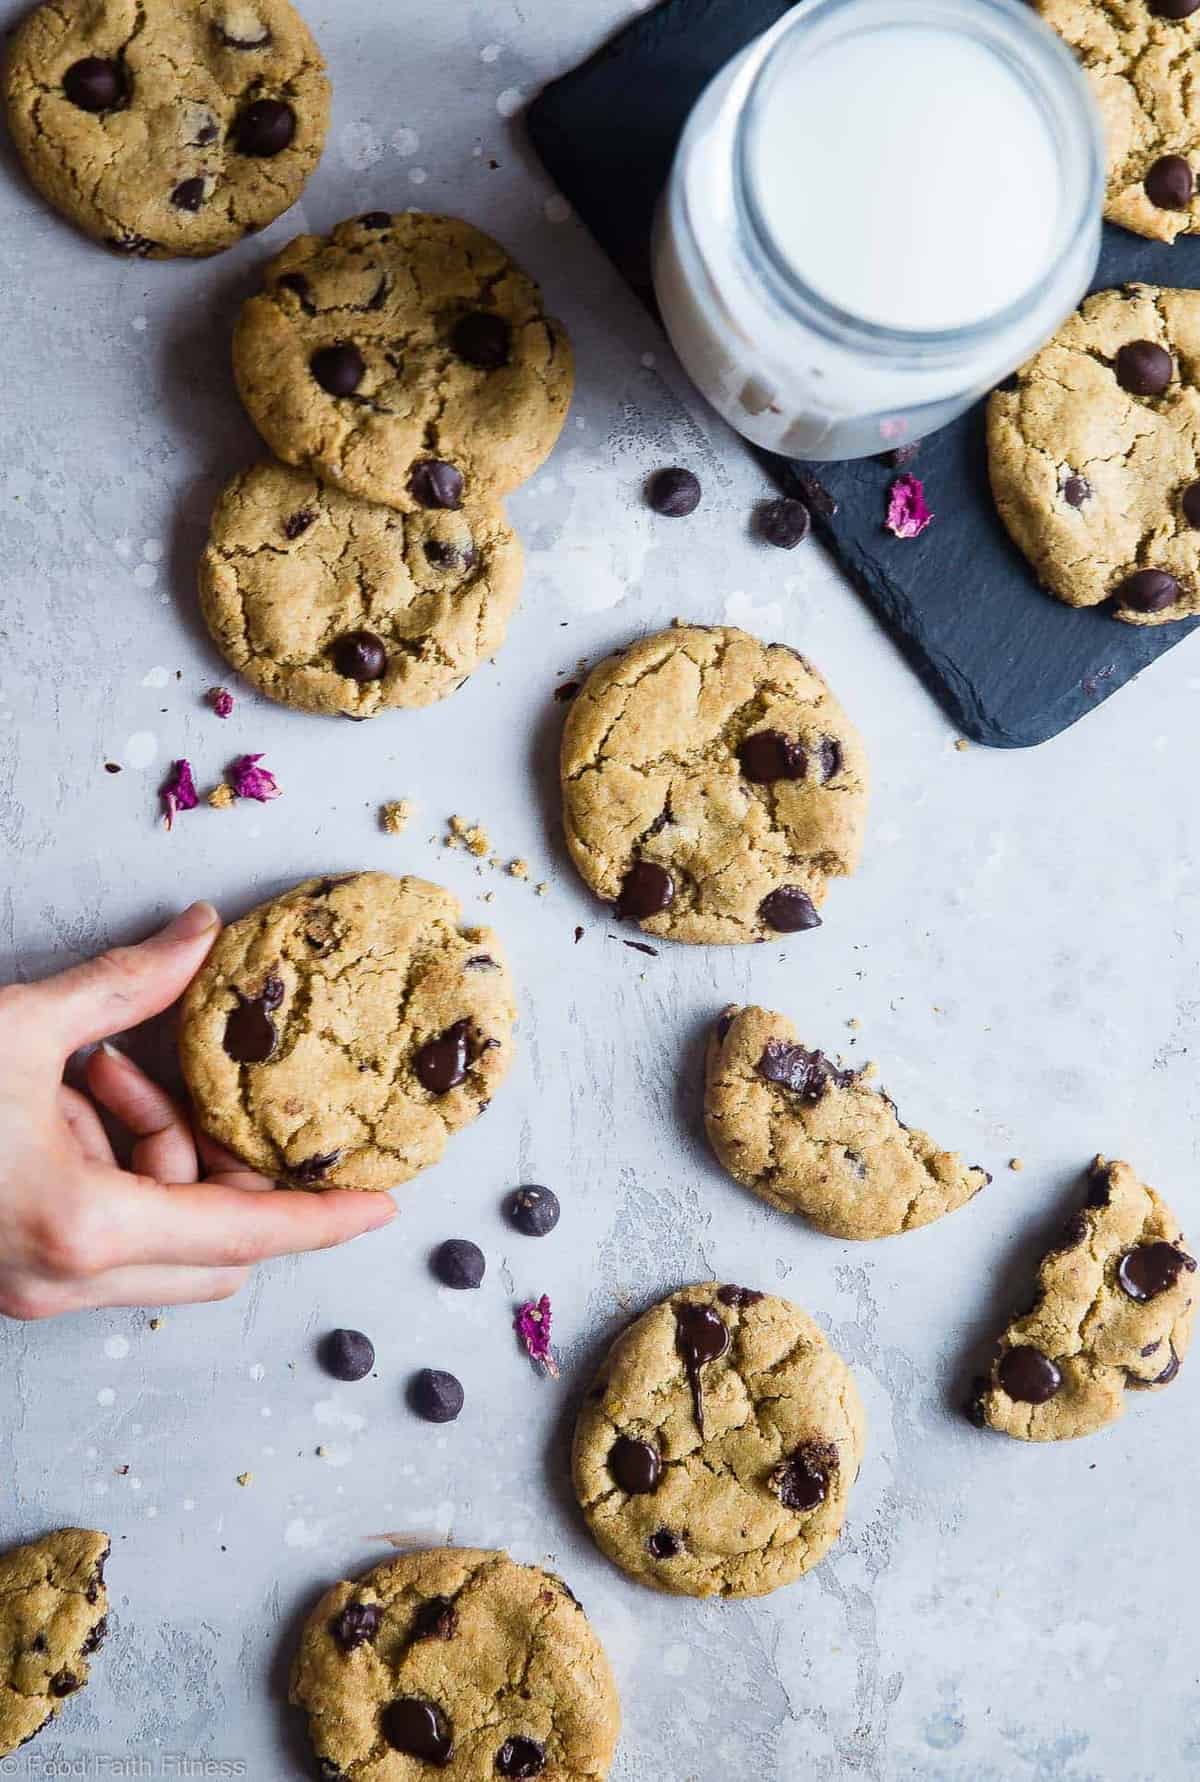 The BEST Eggless Chocolate Chip Cookies - SO chewy on the inside, crispy on the outside and secretly gluten free, with a dairy free and vegan option! The only chocolate chip cookie recipe you well ever need! | #Foodfaithfitness | #Glutenfree #Vegan #Healthy #Cookies #EggFree